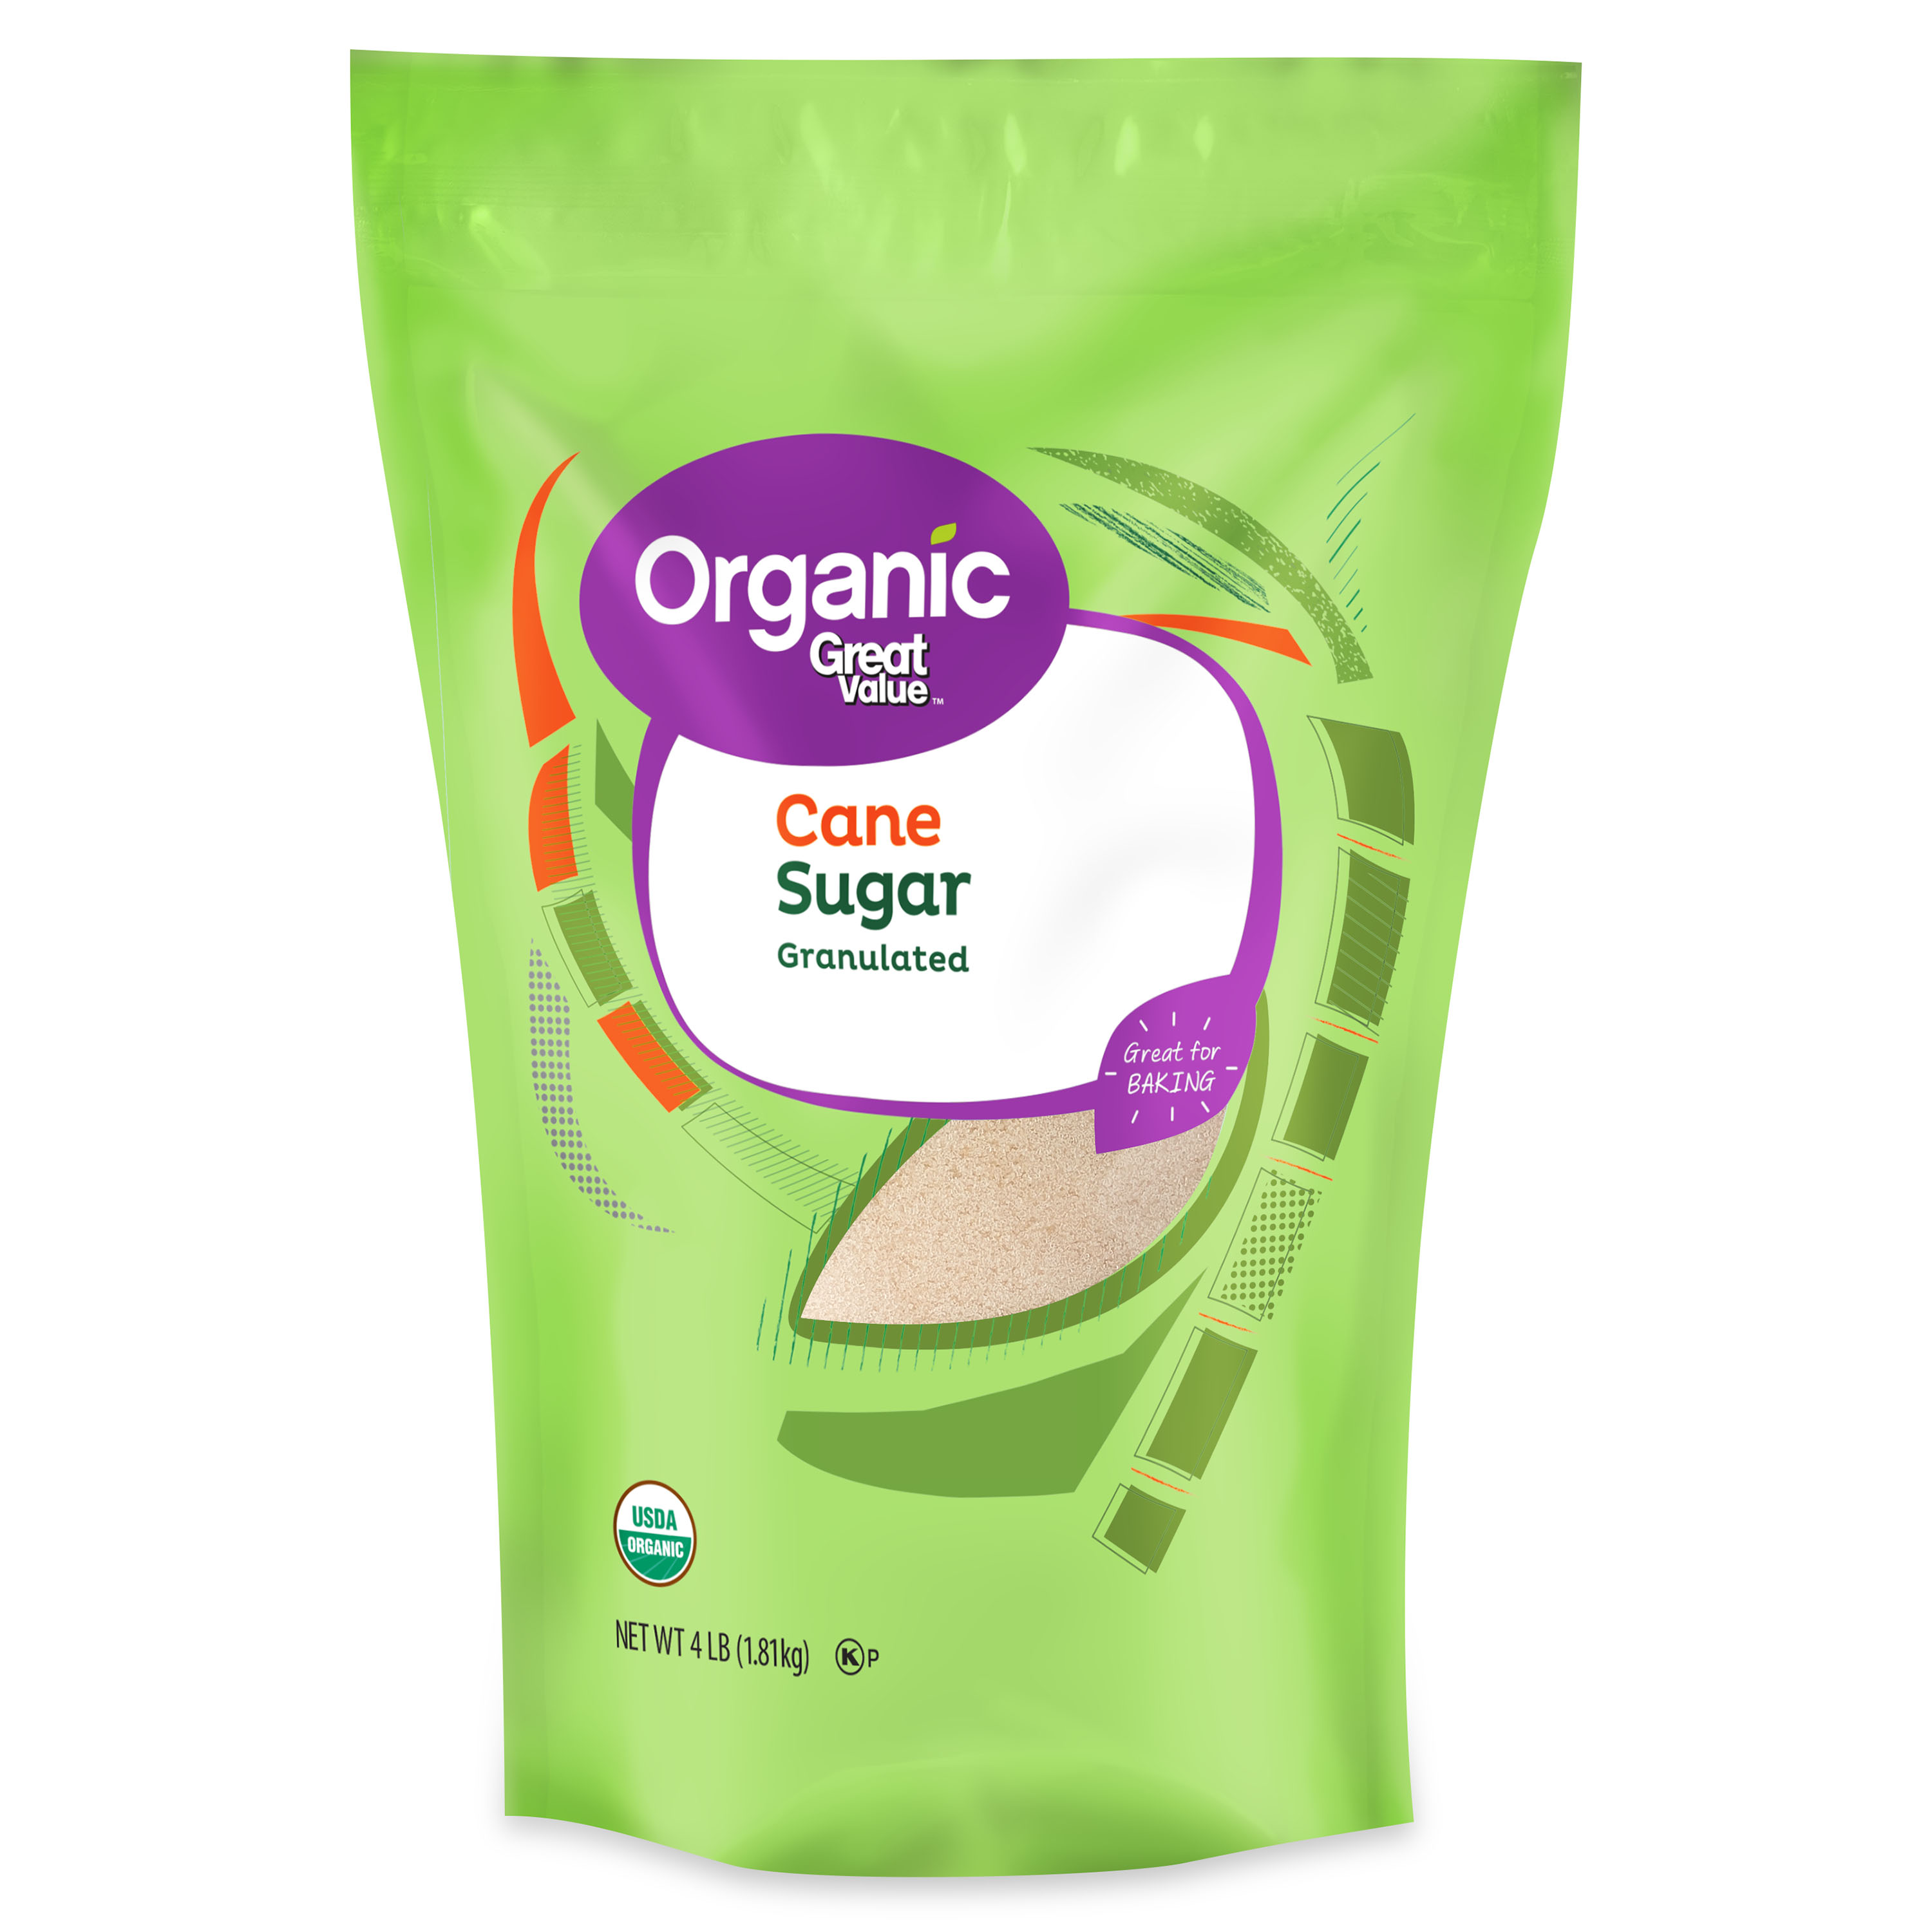 Great Value Organic Granulated Cane Sugar, 4 lbs - image 1 of 7